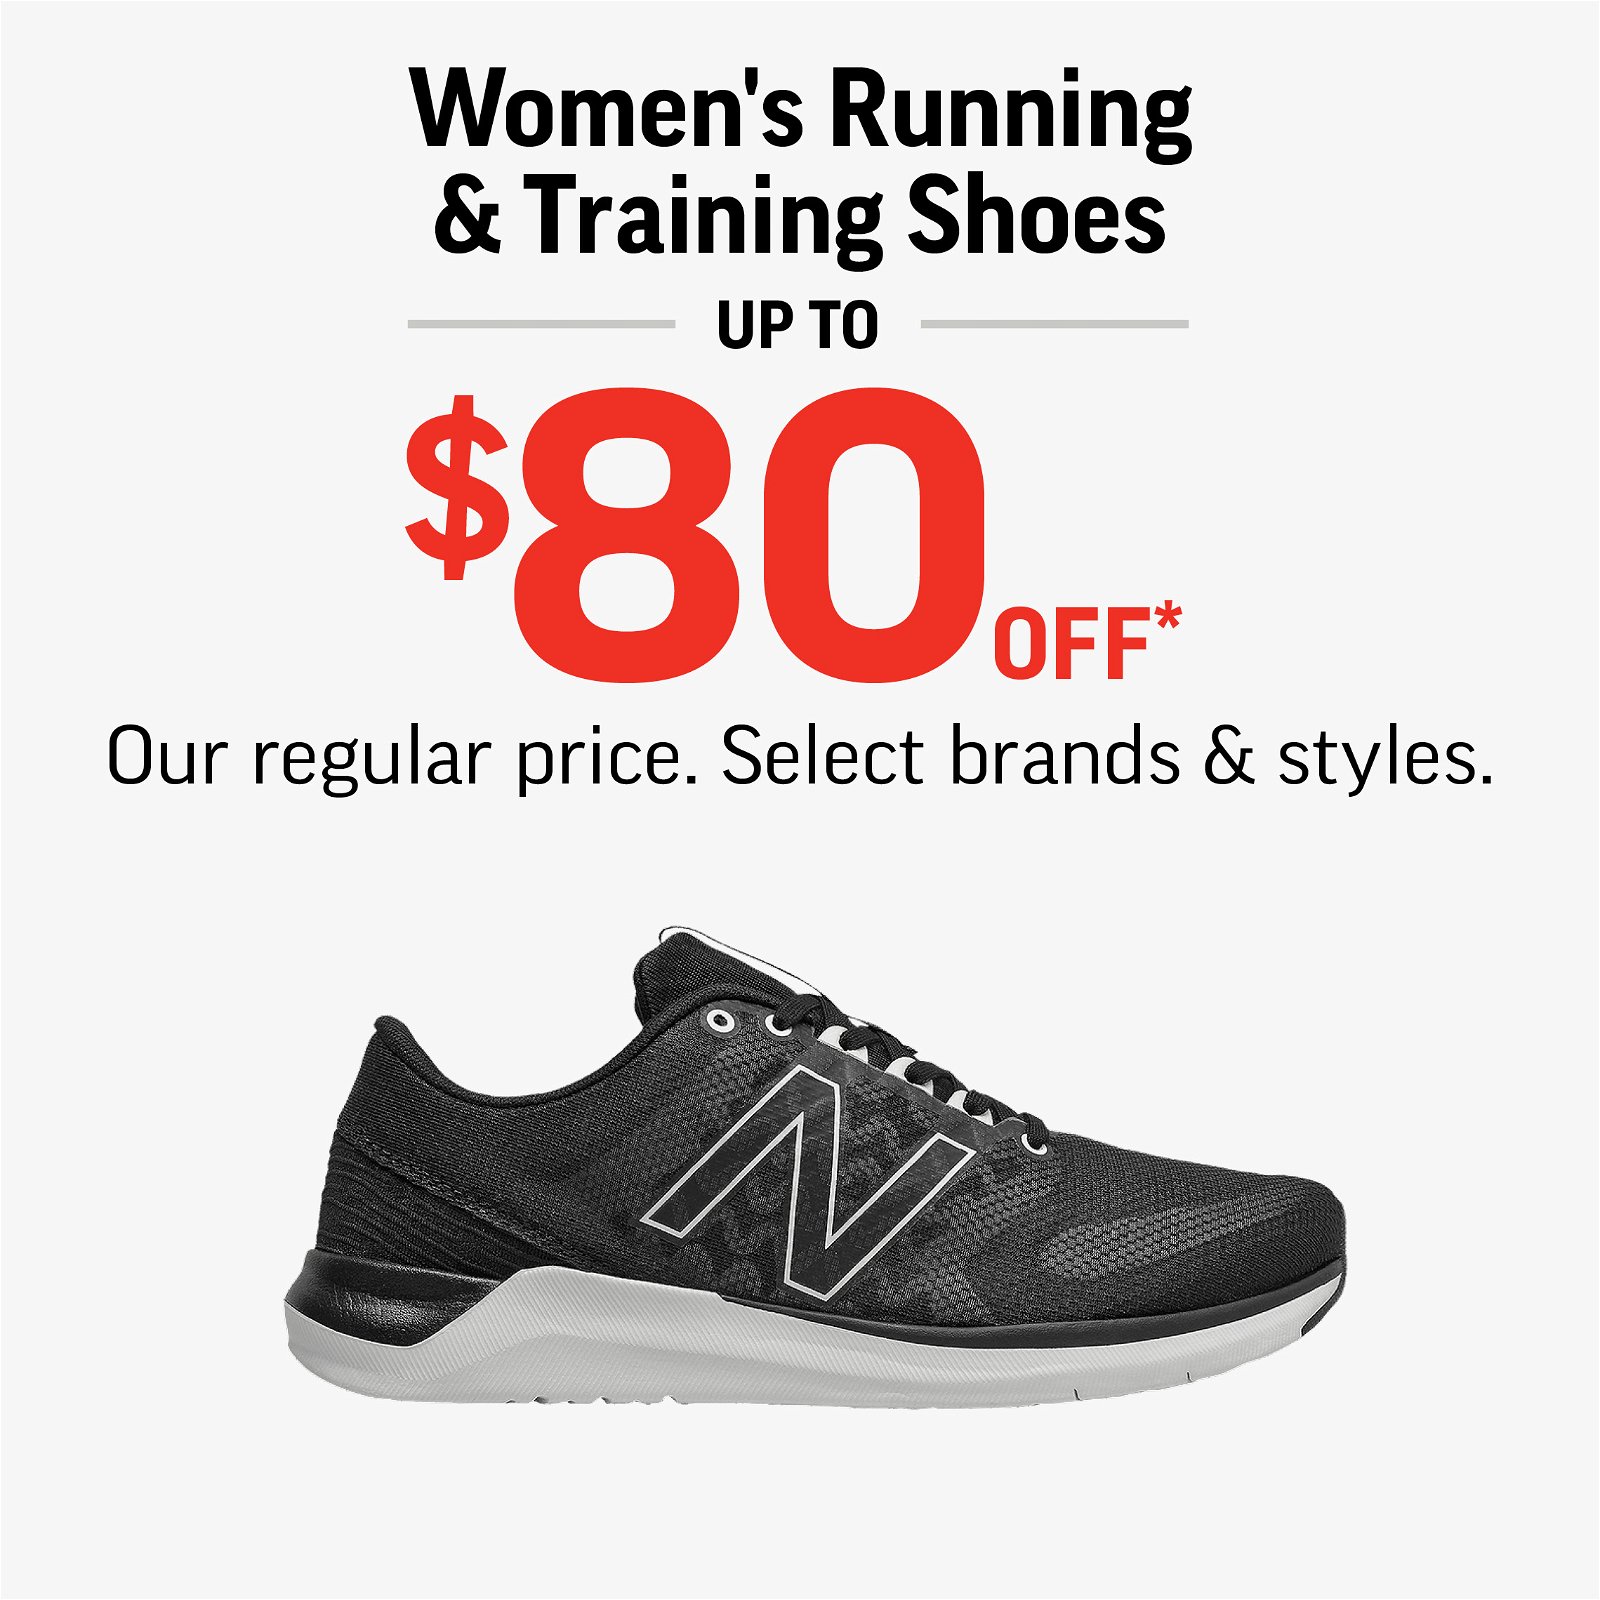 WOMEN'S RUNNING & TRAINING SHOES UP TO $80 OFF